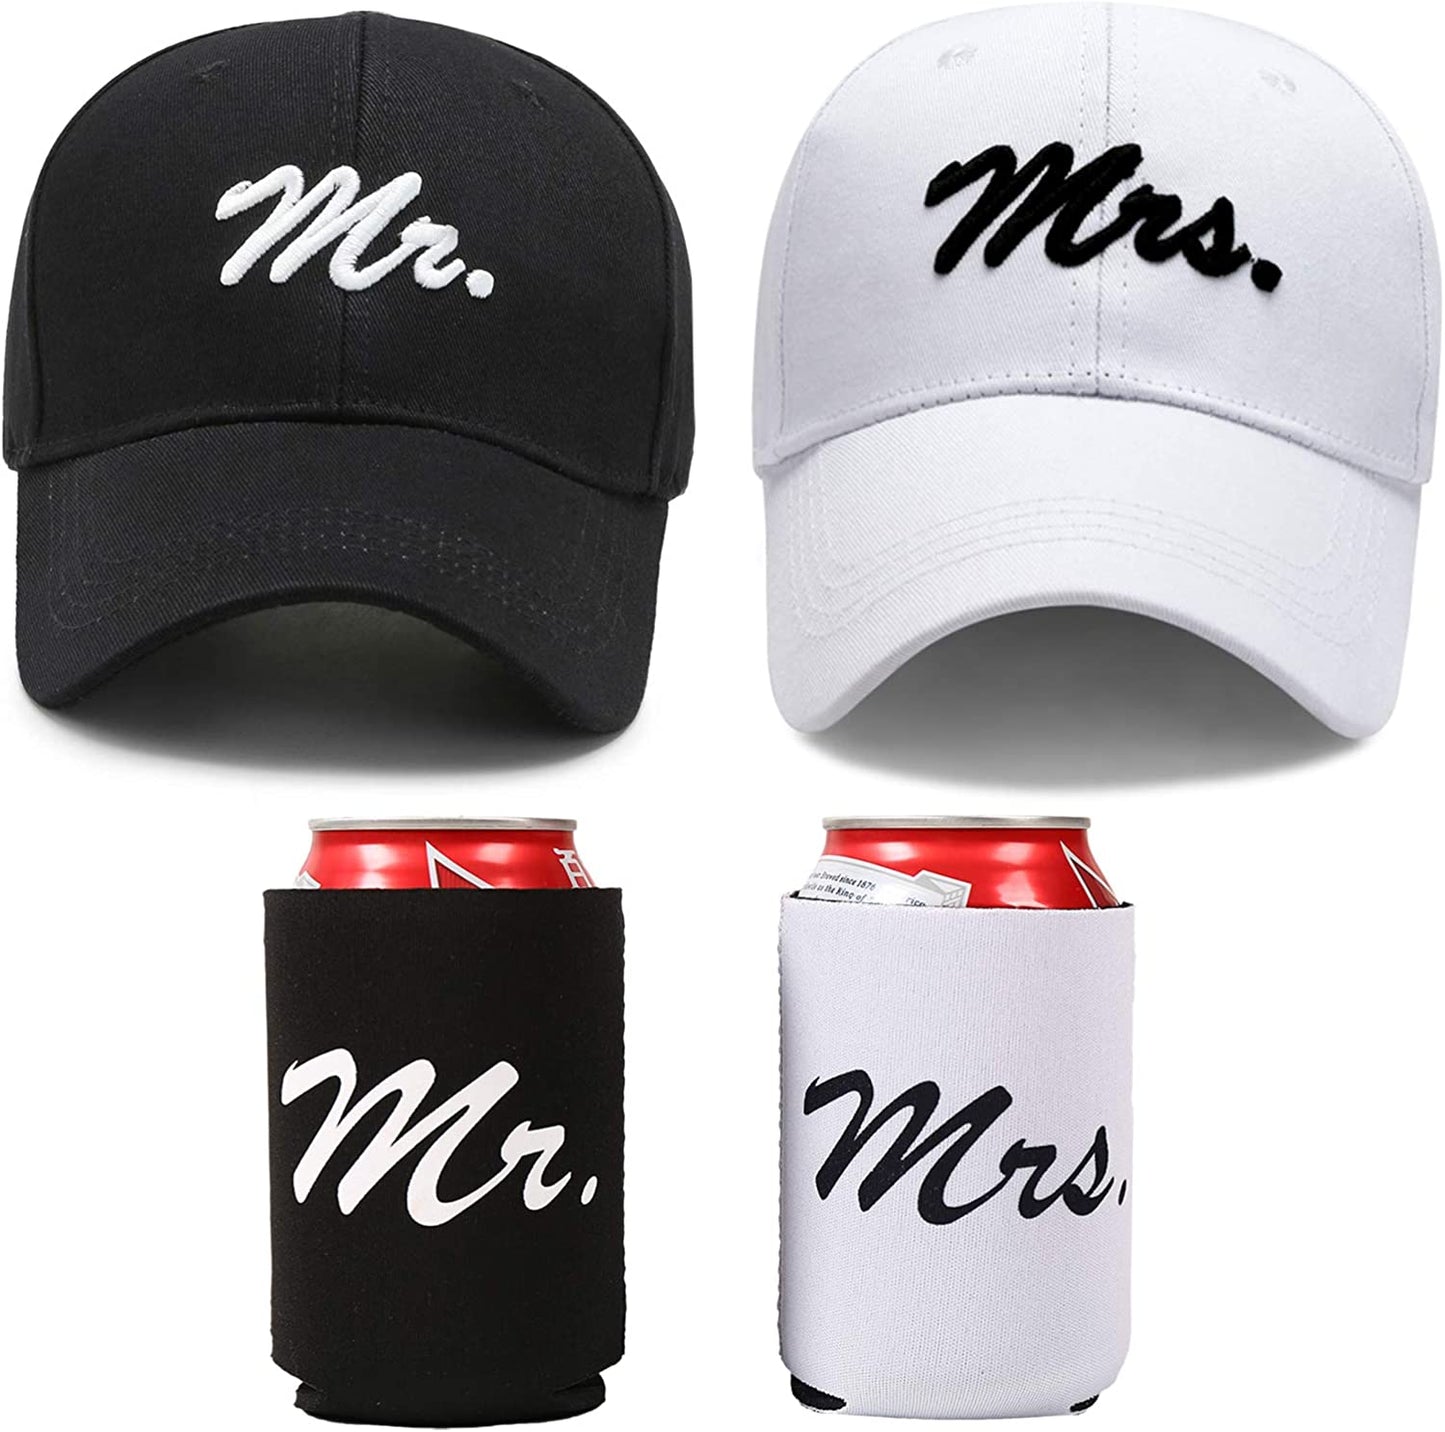 Bride and Groom Caps